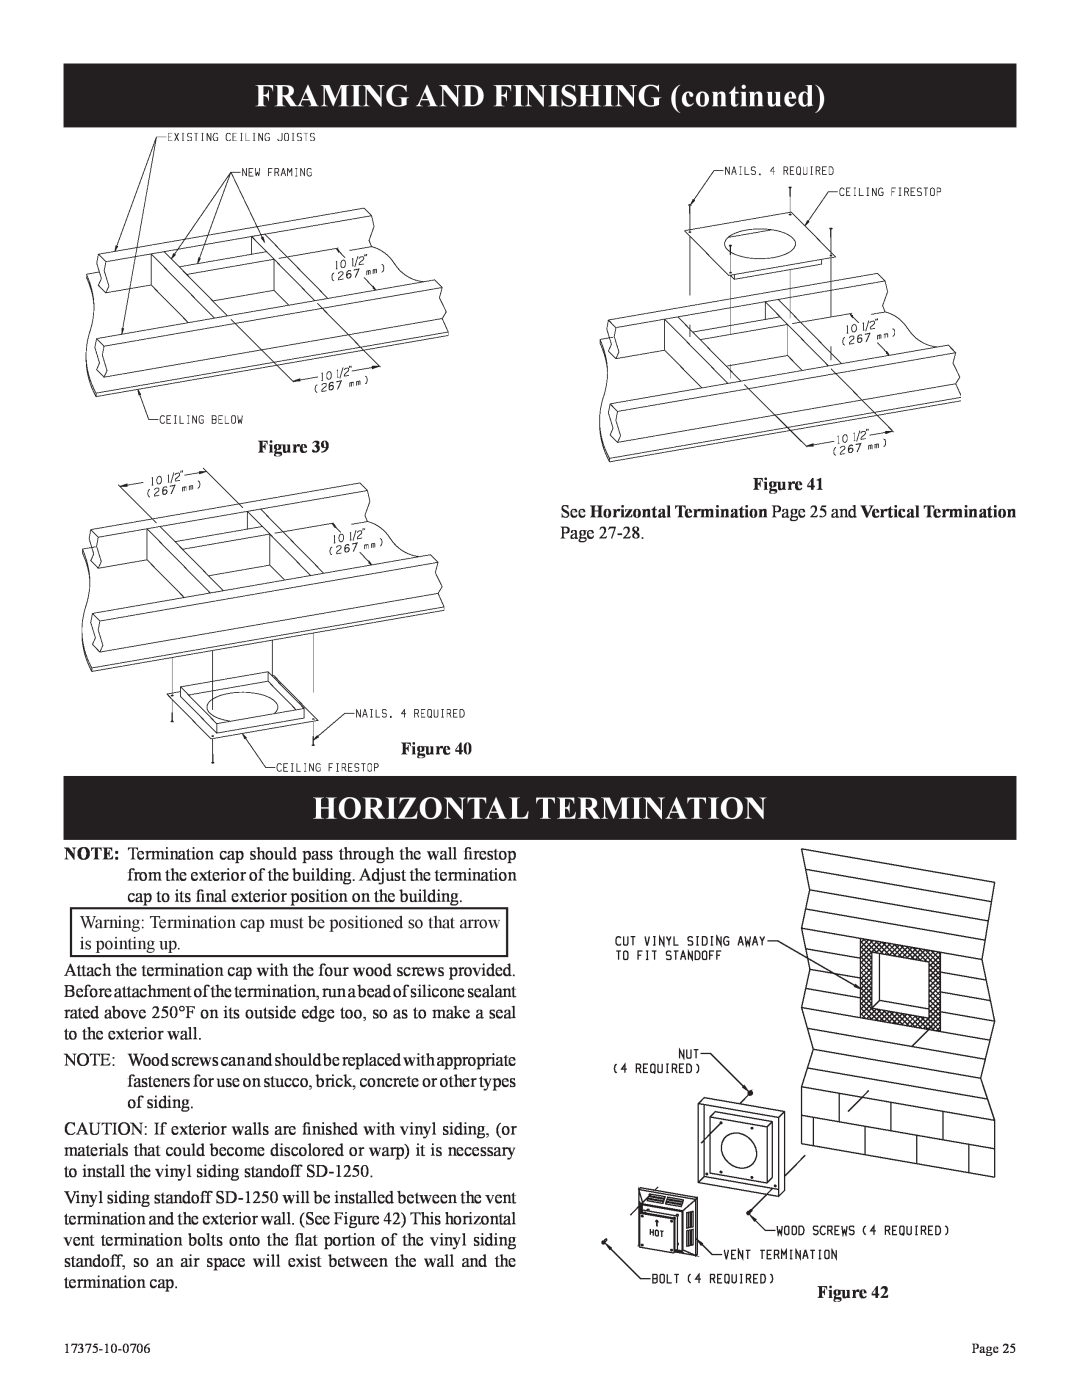 Empire Comfort Systems DVP48FP7(0,1,2,3)(N,P)-1 FRAMING AND FINISHING continued, Horizontal Termination, Figure Figure 